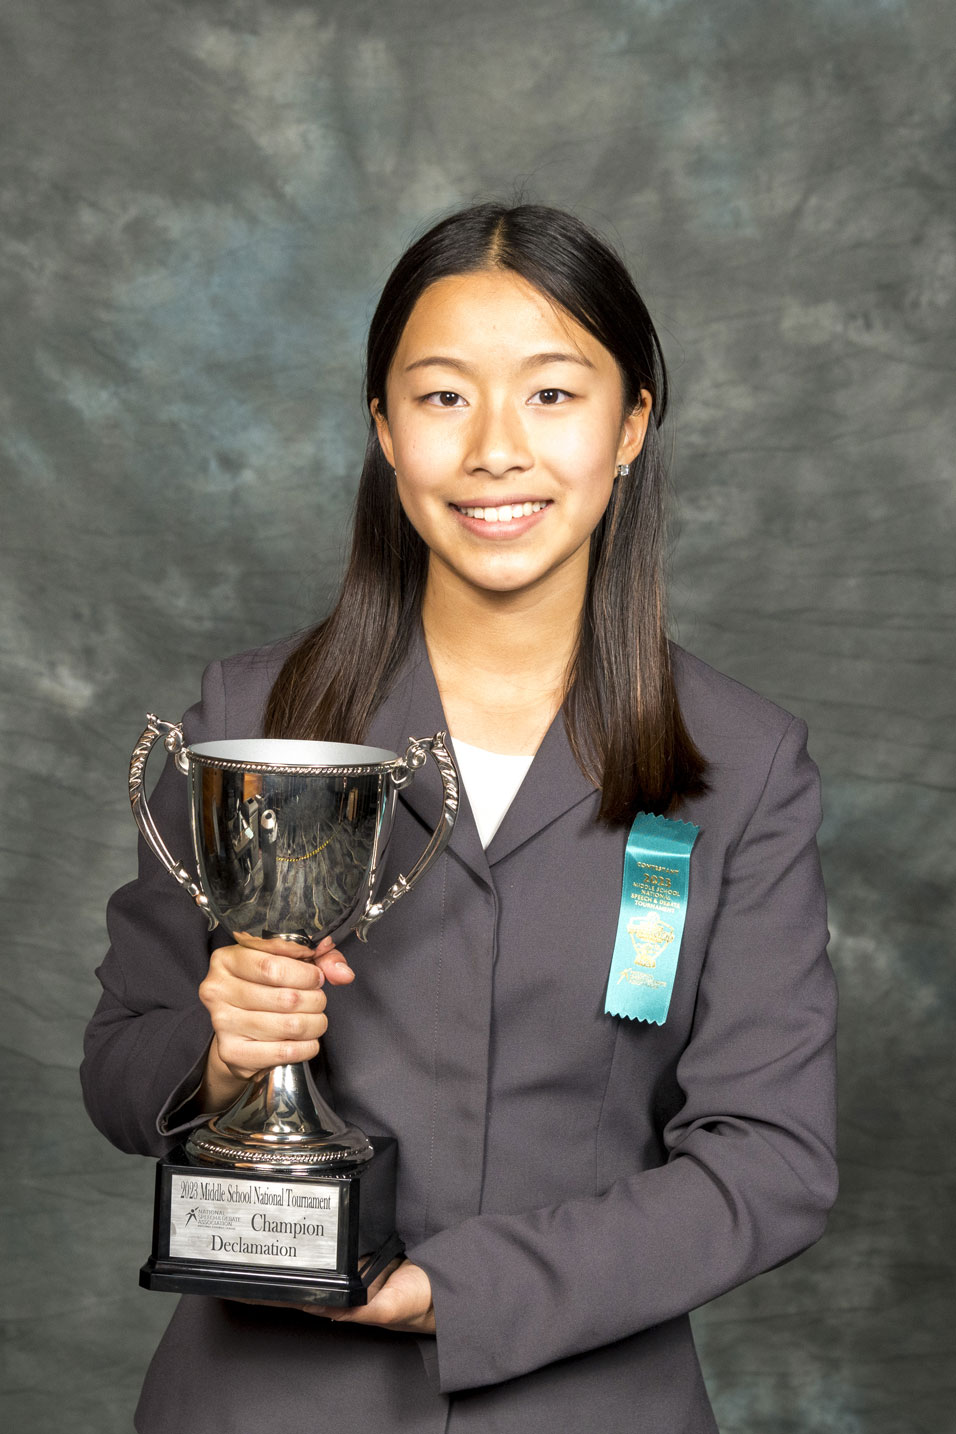 Natalie Chen from The King’s Academy Middle School in California
Coached by Ricardo Velasquez